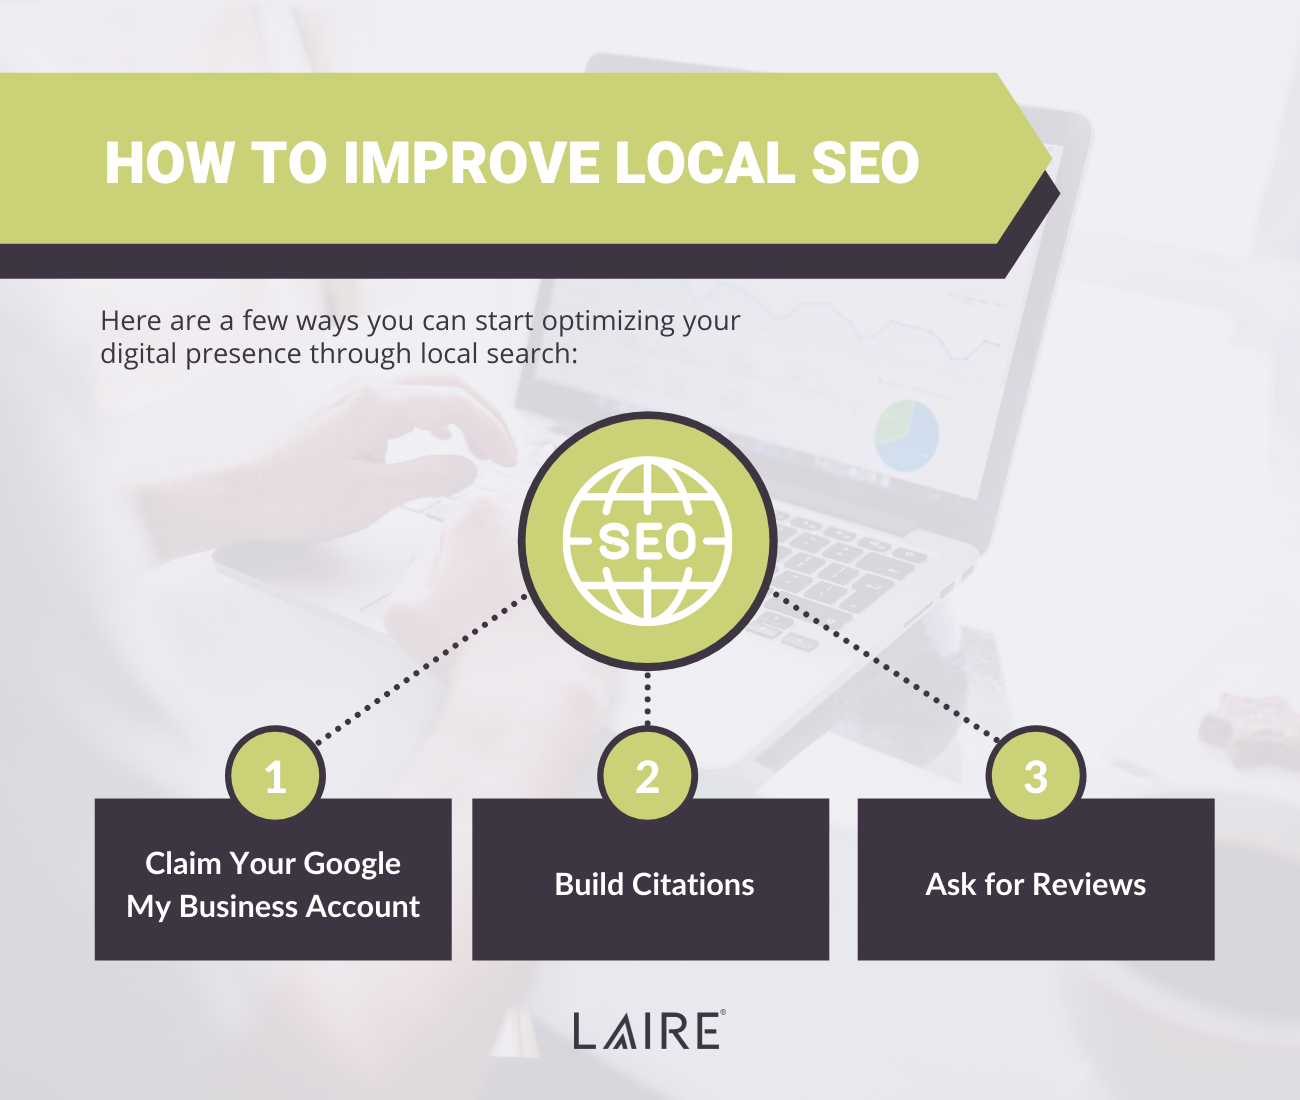 How to improve local seo chart